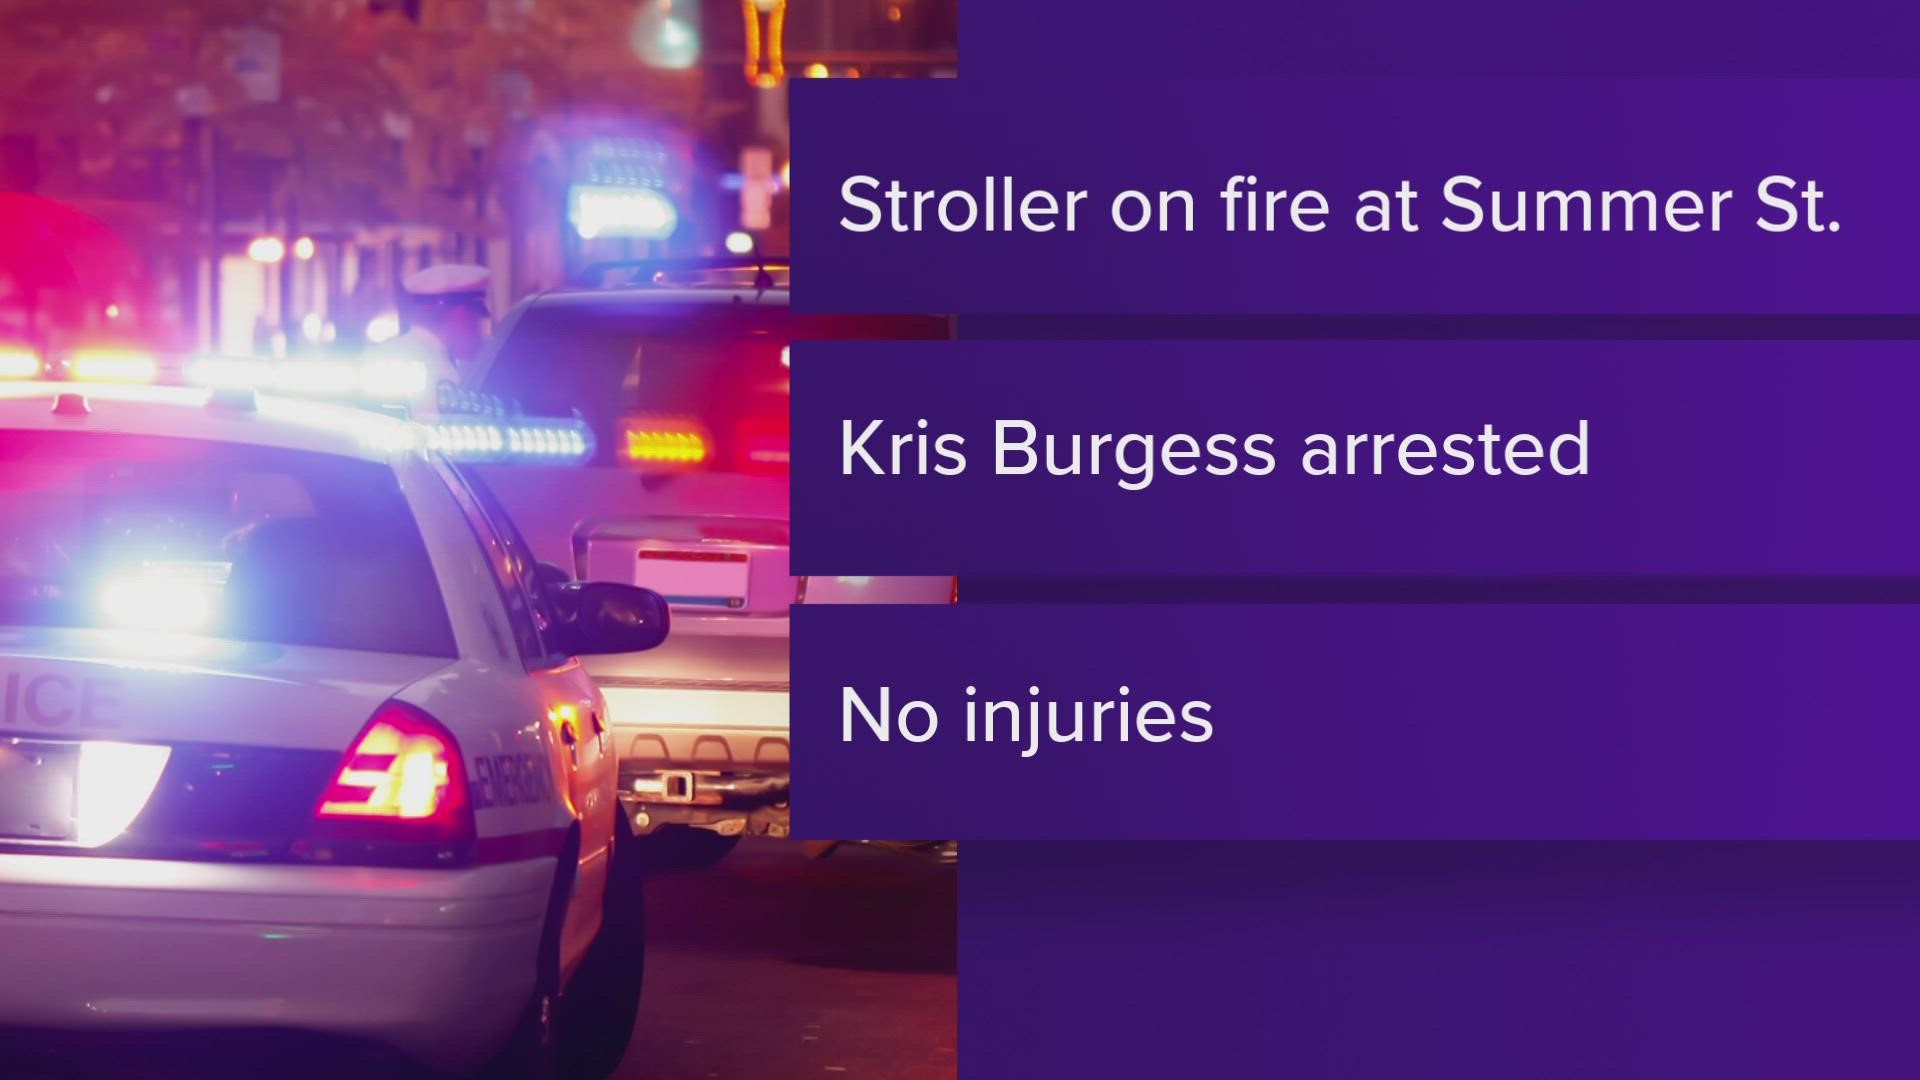 Police found an unoccupied stroller on fire before arresting 32-year-old Kris Burgess on Thursday.